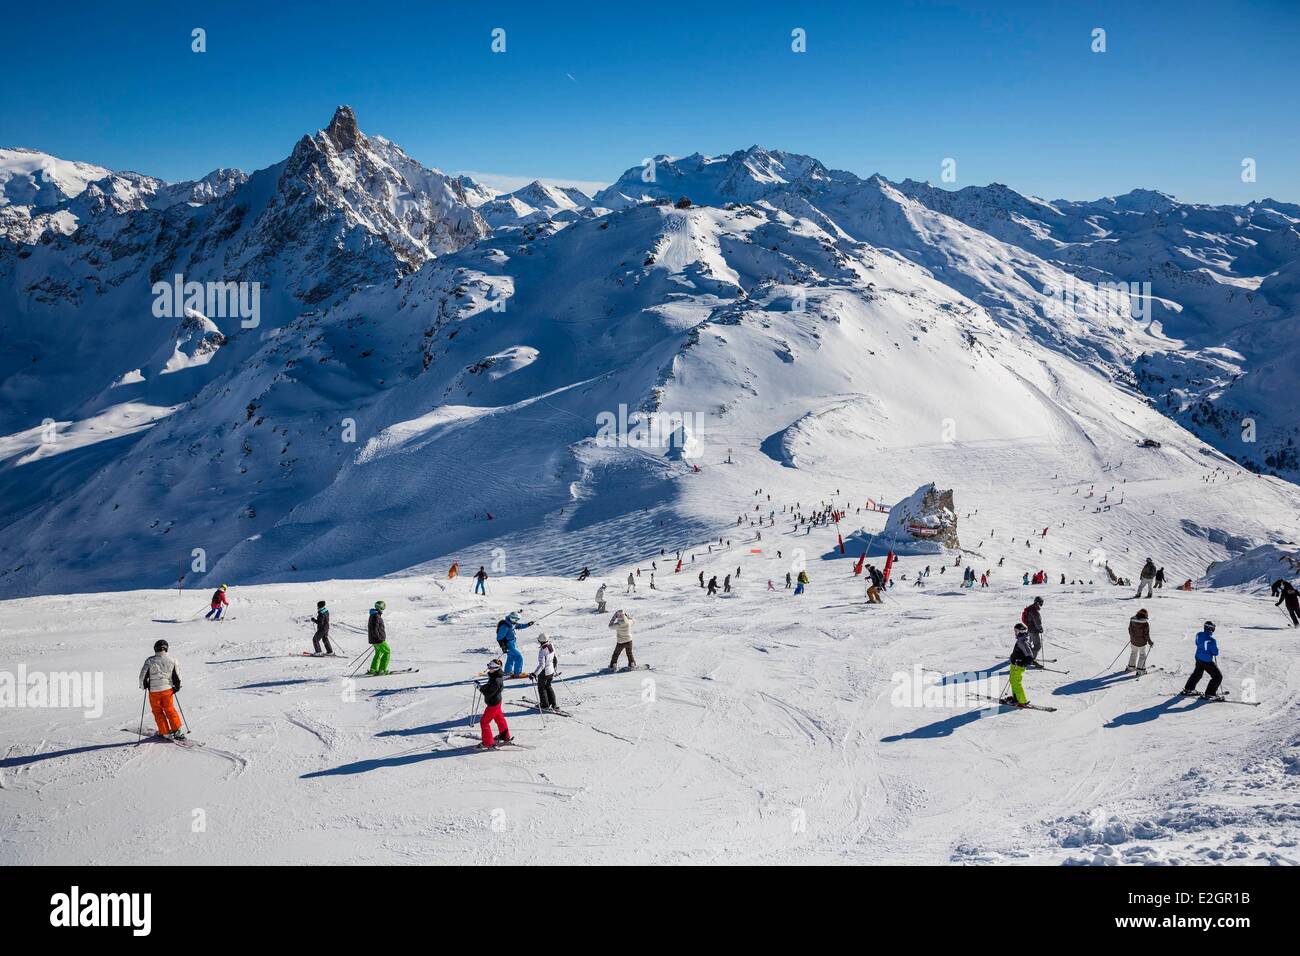 France Savoie Tarentaise valley Meribel Courchevel Les Trois Vallees (The Three Valleys) one of biggest ski areas in world with 600km of marked trails Vanoise Massif view of Aiguille du Fruit (3051m) and Mont de Gebroulaz (3511m) Stock Photo